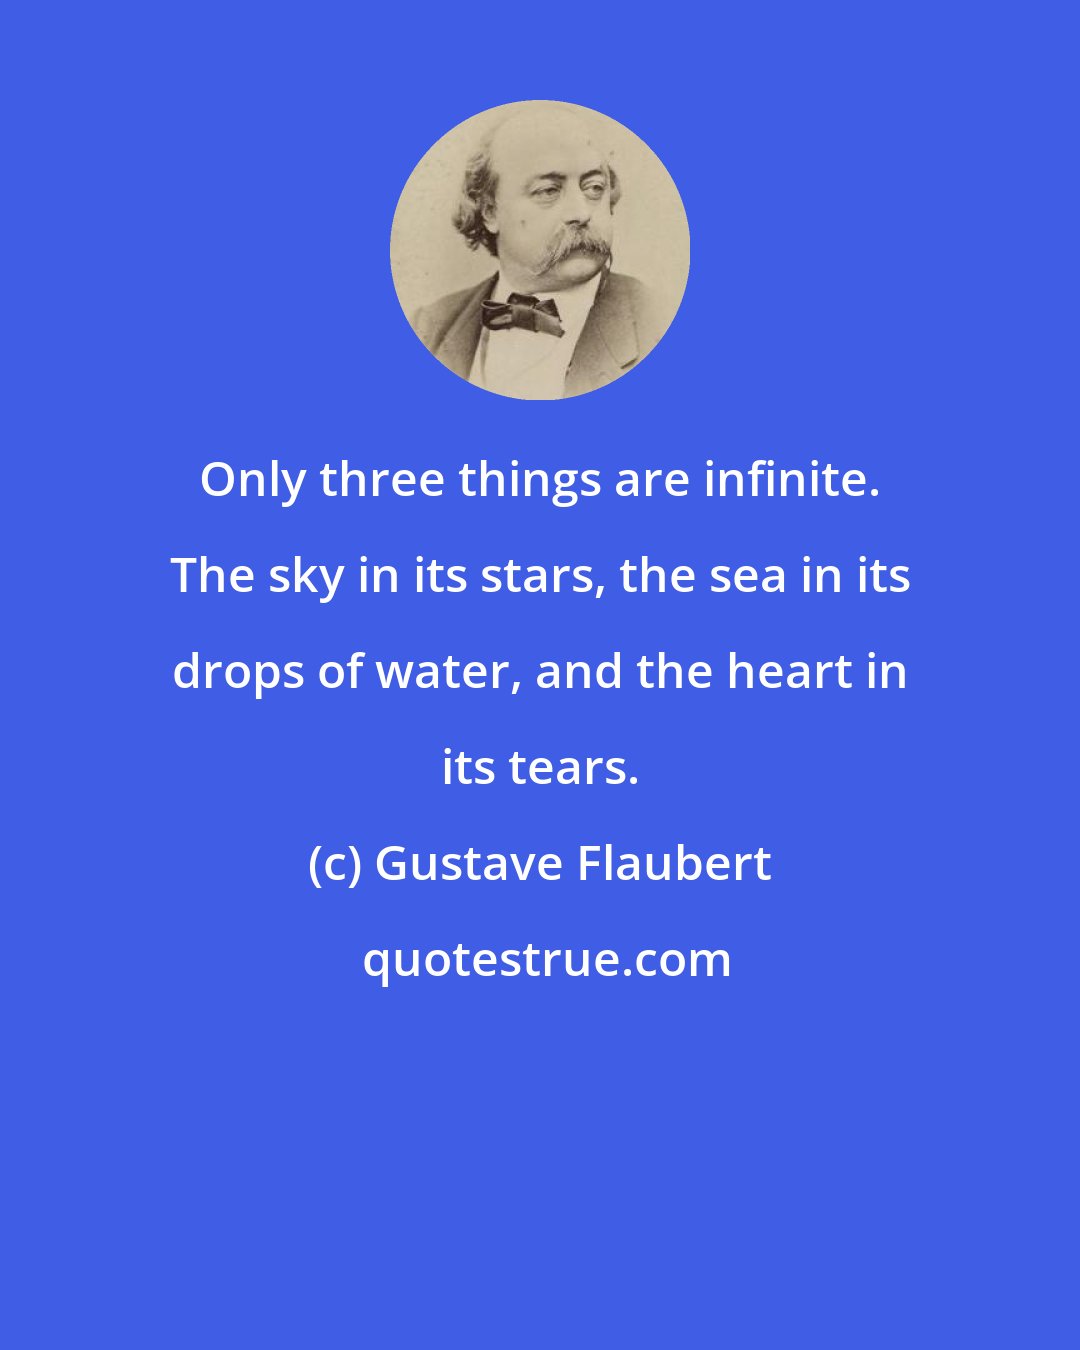 Gustave Flaubert: Only three things are infinite. The sky in its stars, the sea in its drops of water, and the heart in its tears.